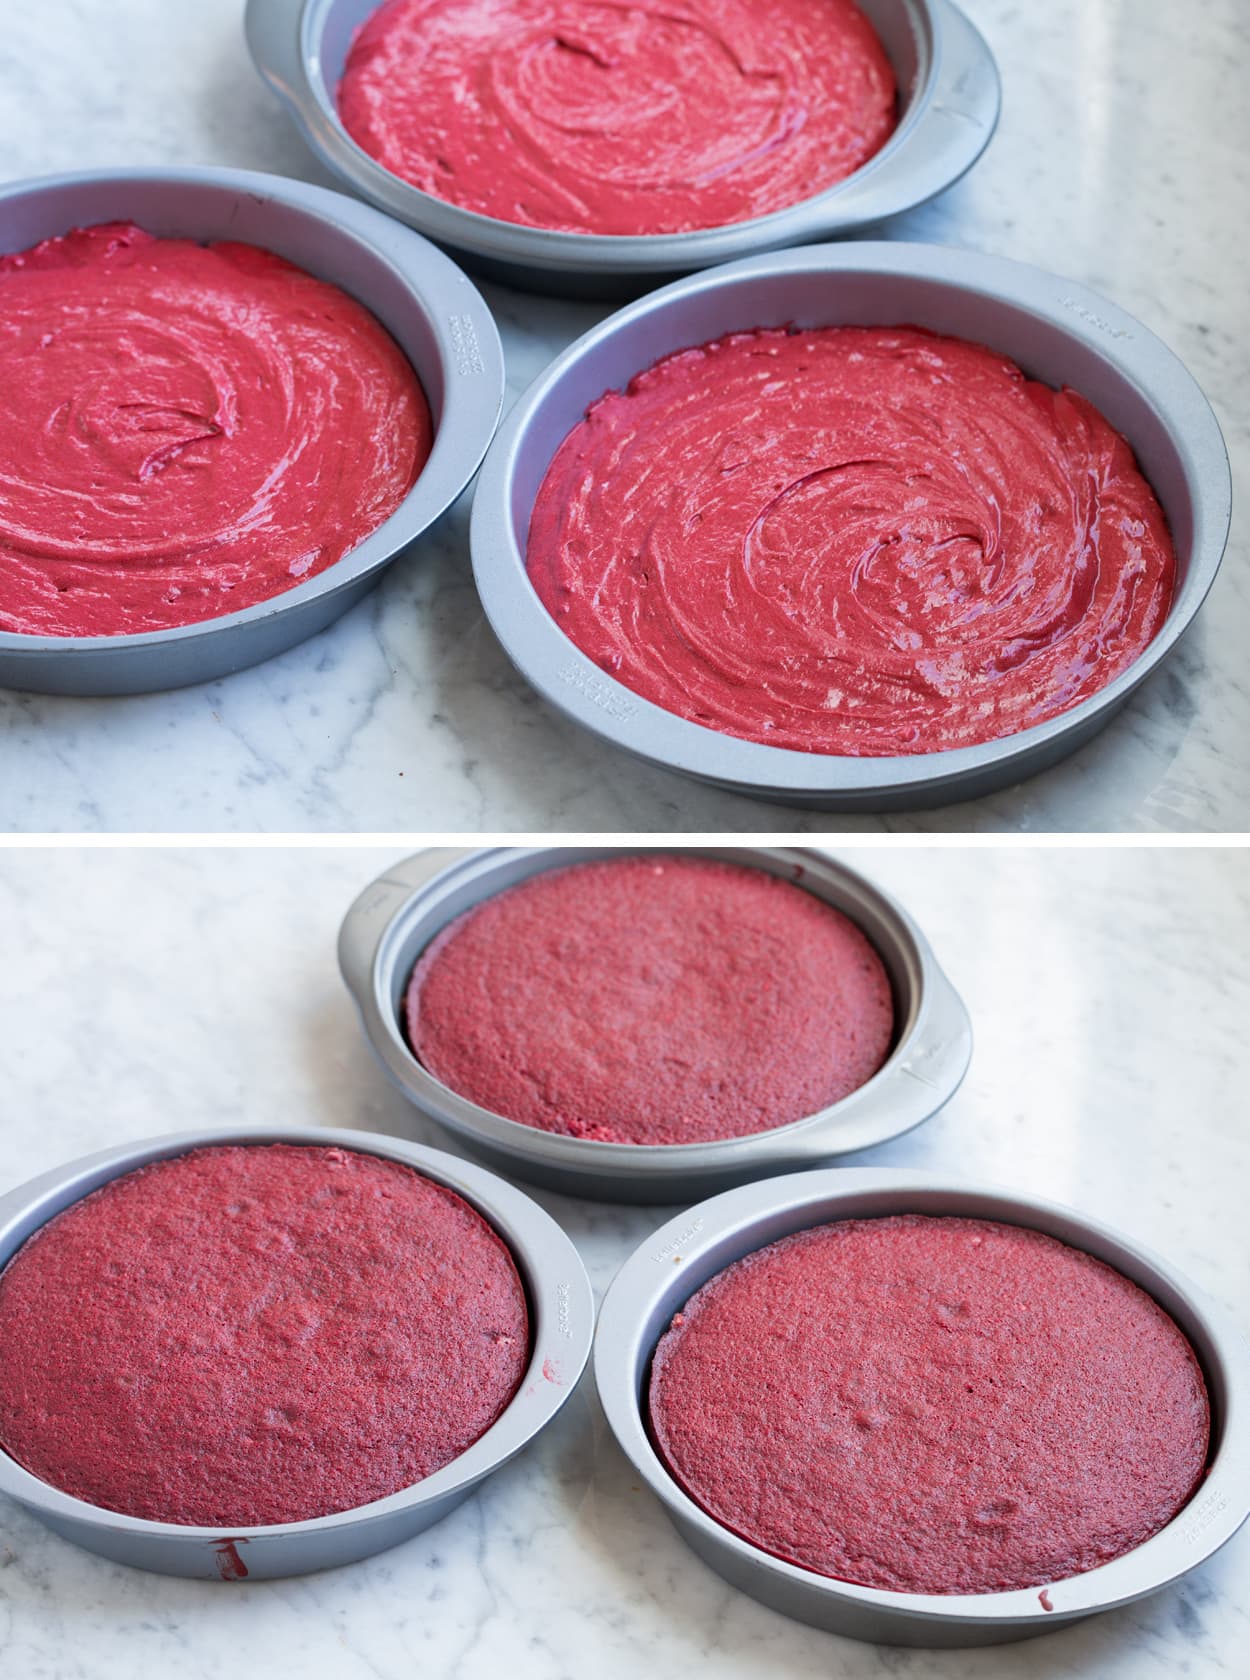 Red Velvet Cake batter in three pans shown before baking then lower image showing cakes after baking.